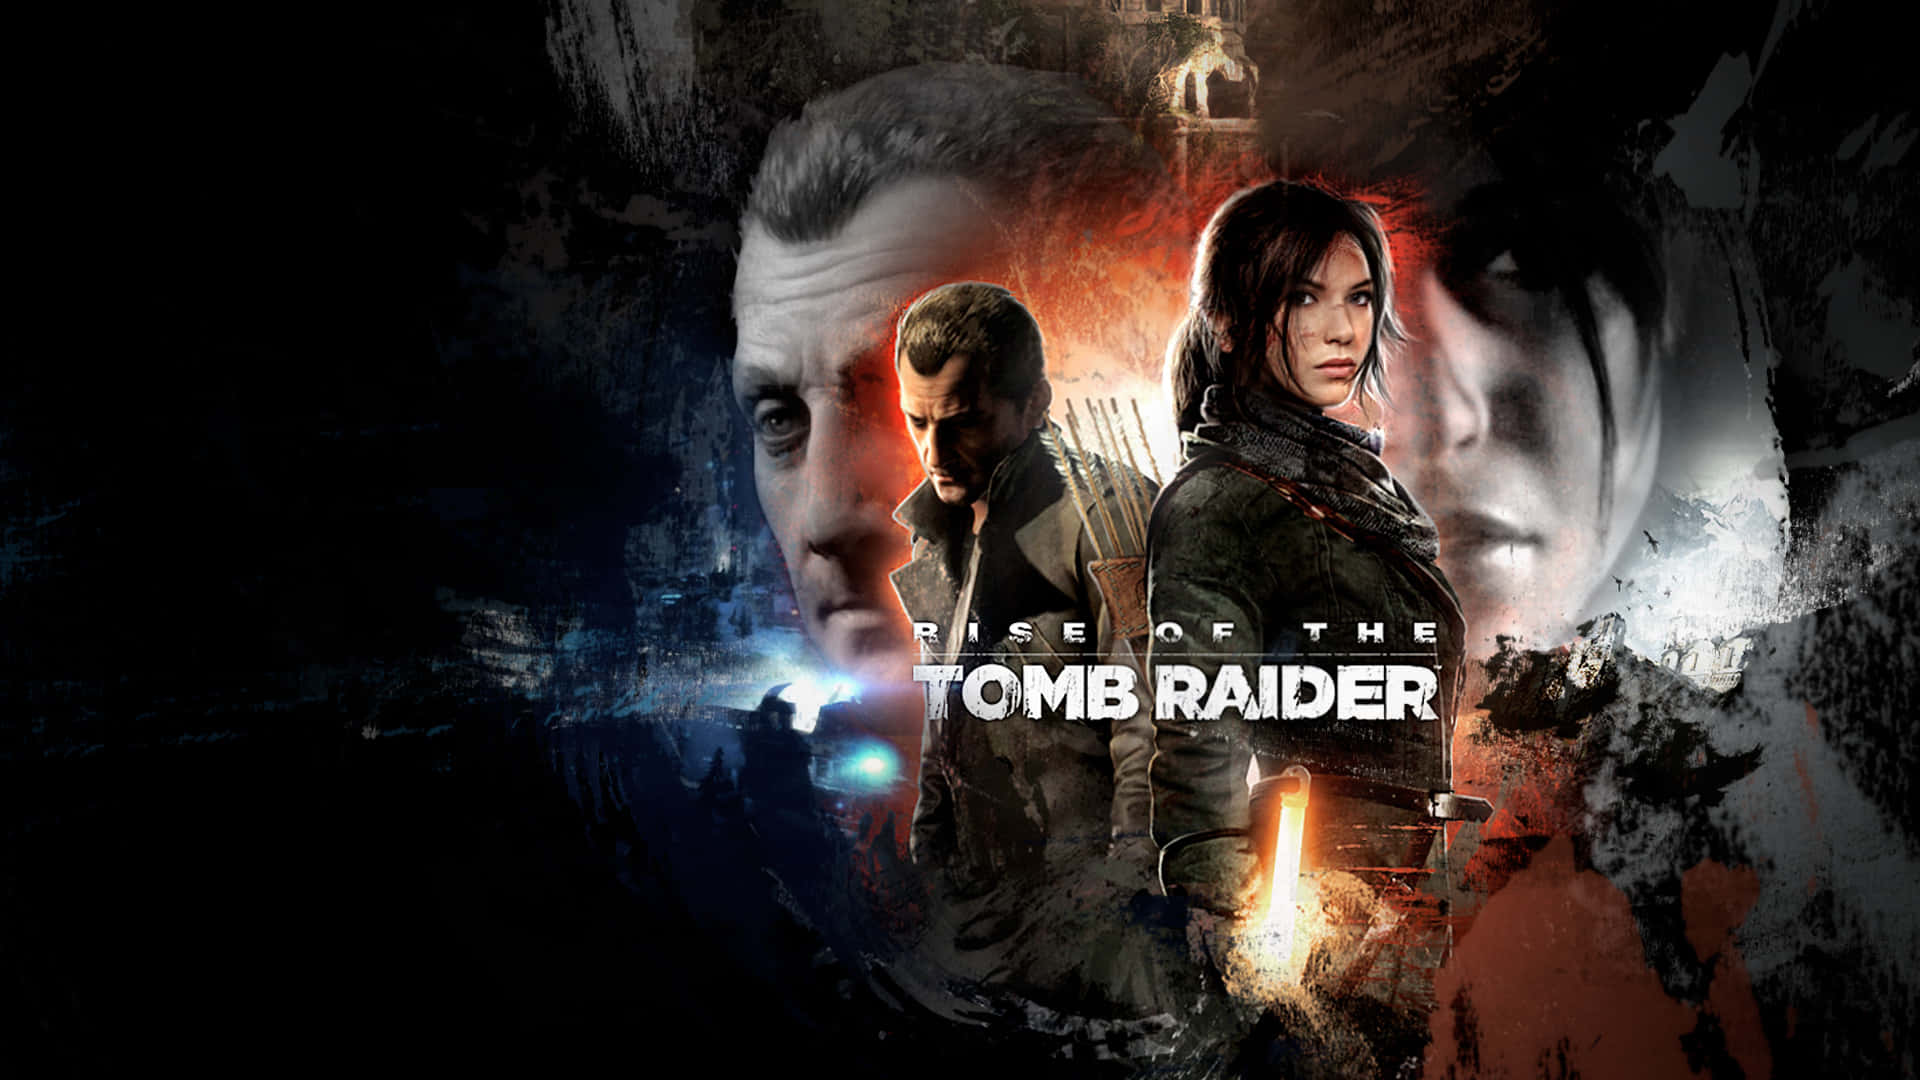 The Tomb Raider Is Shown On The Cover